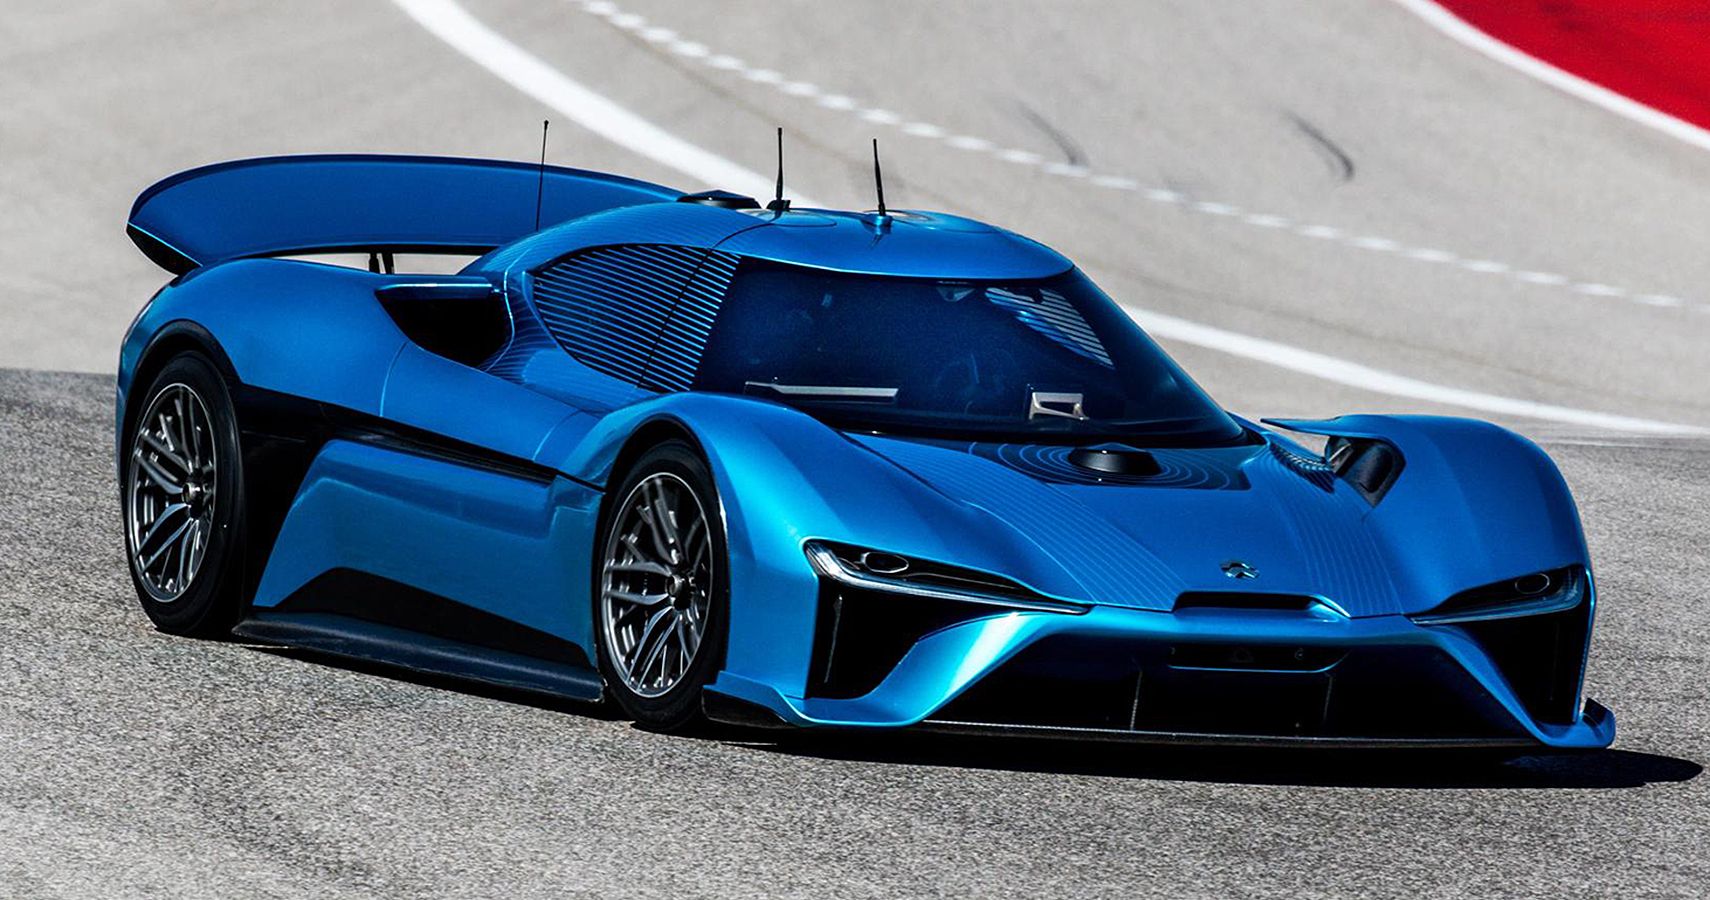 NIO EP9 Is An Outperforming Electric Supercar